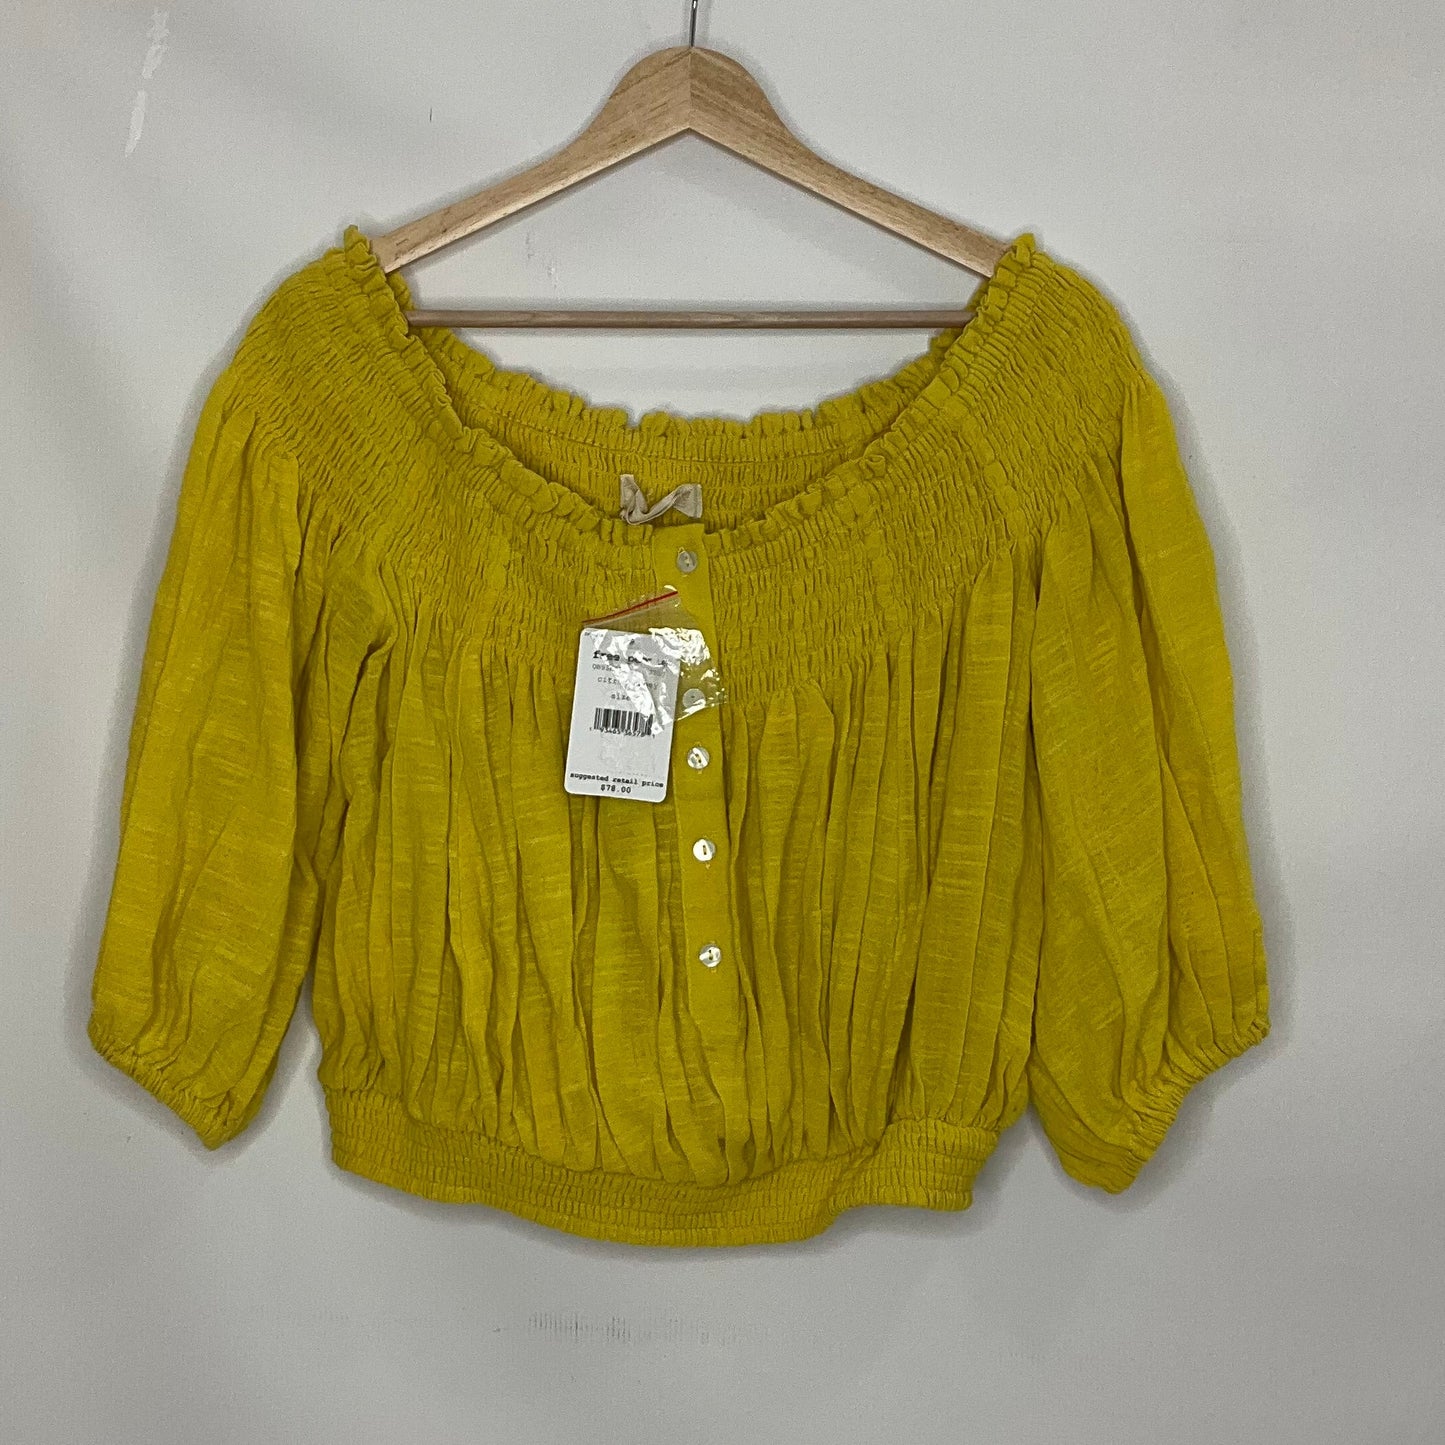 Yellow Top Short Sleeve We The Free, Size S